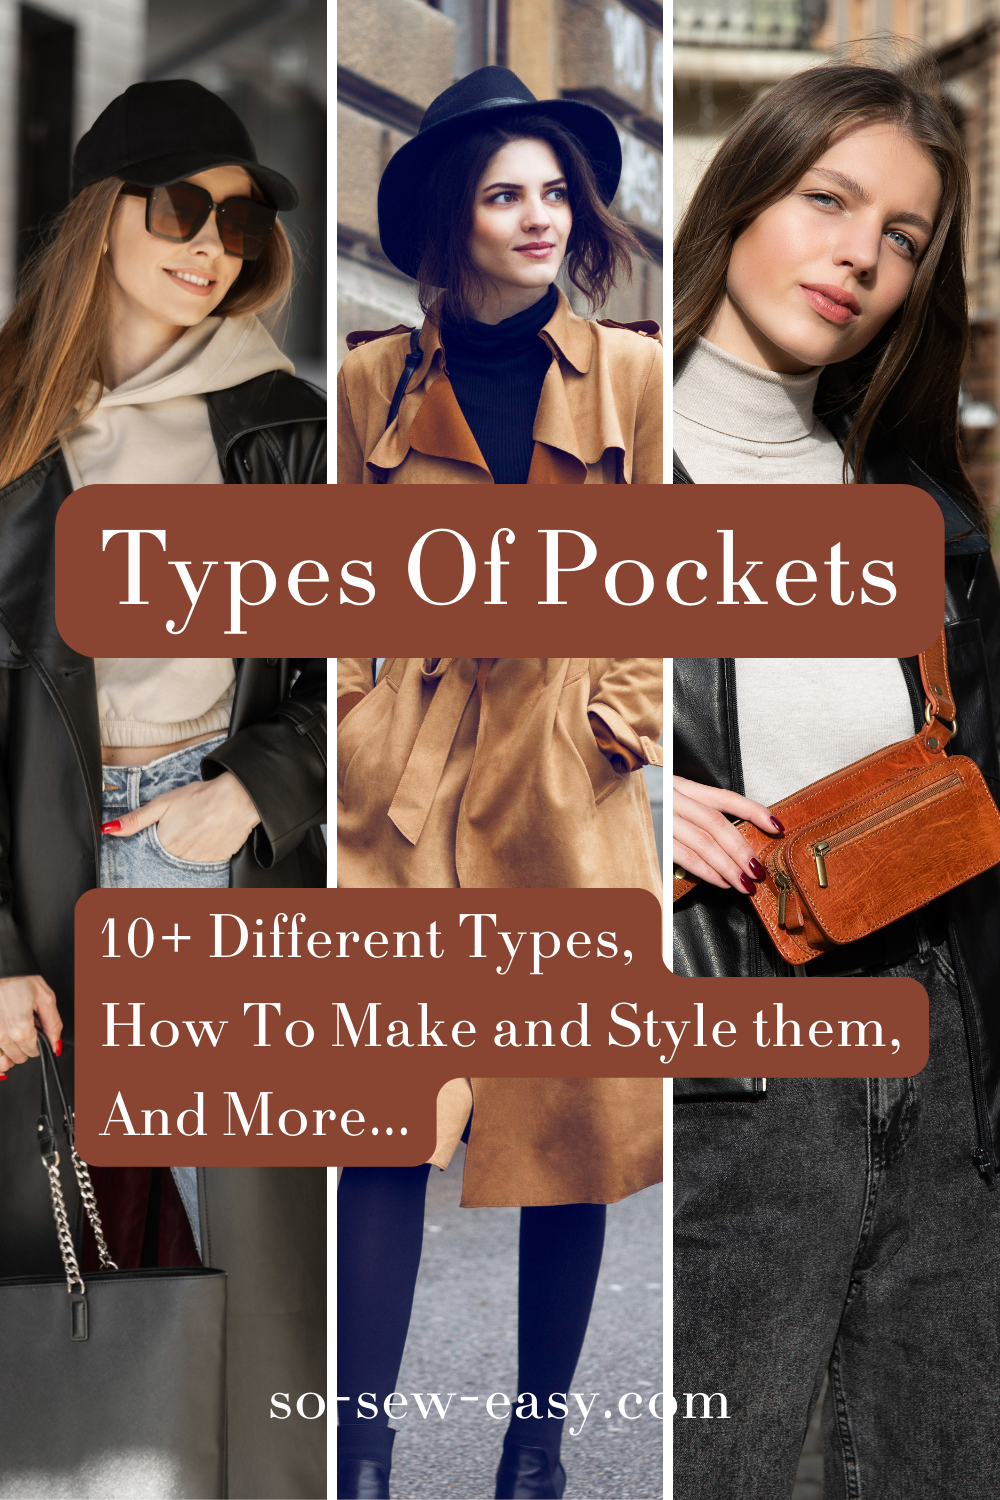 Types Of Pockets - How To Make, Style, And Identify Them